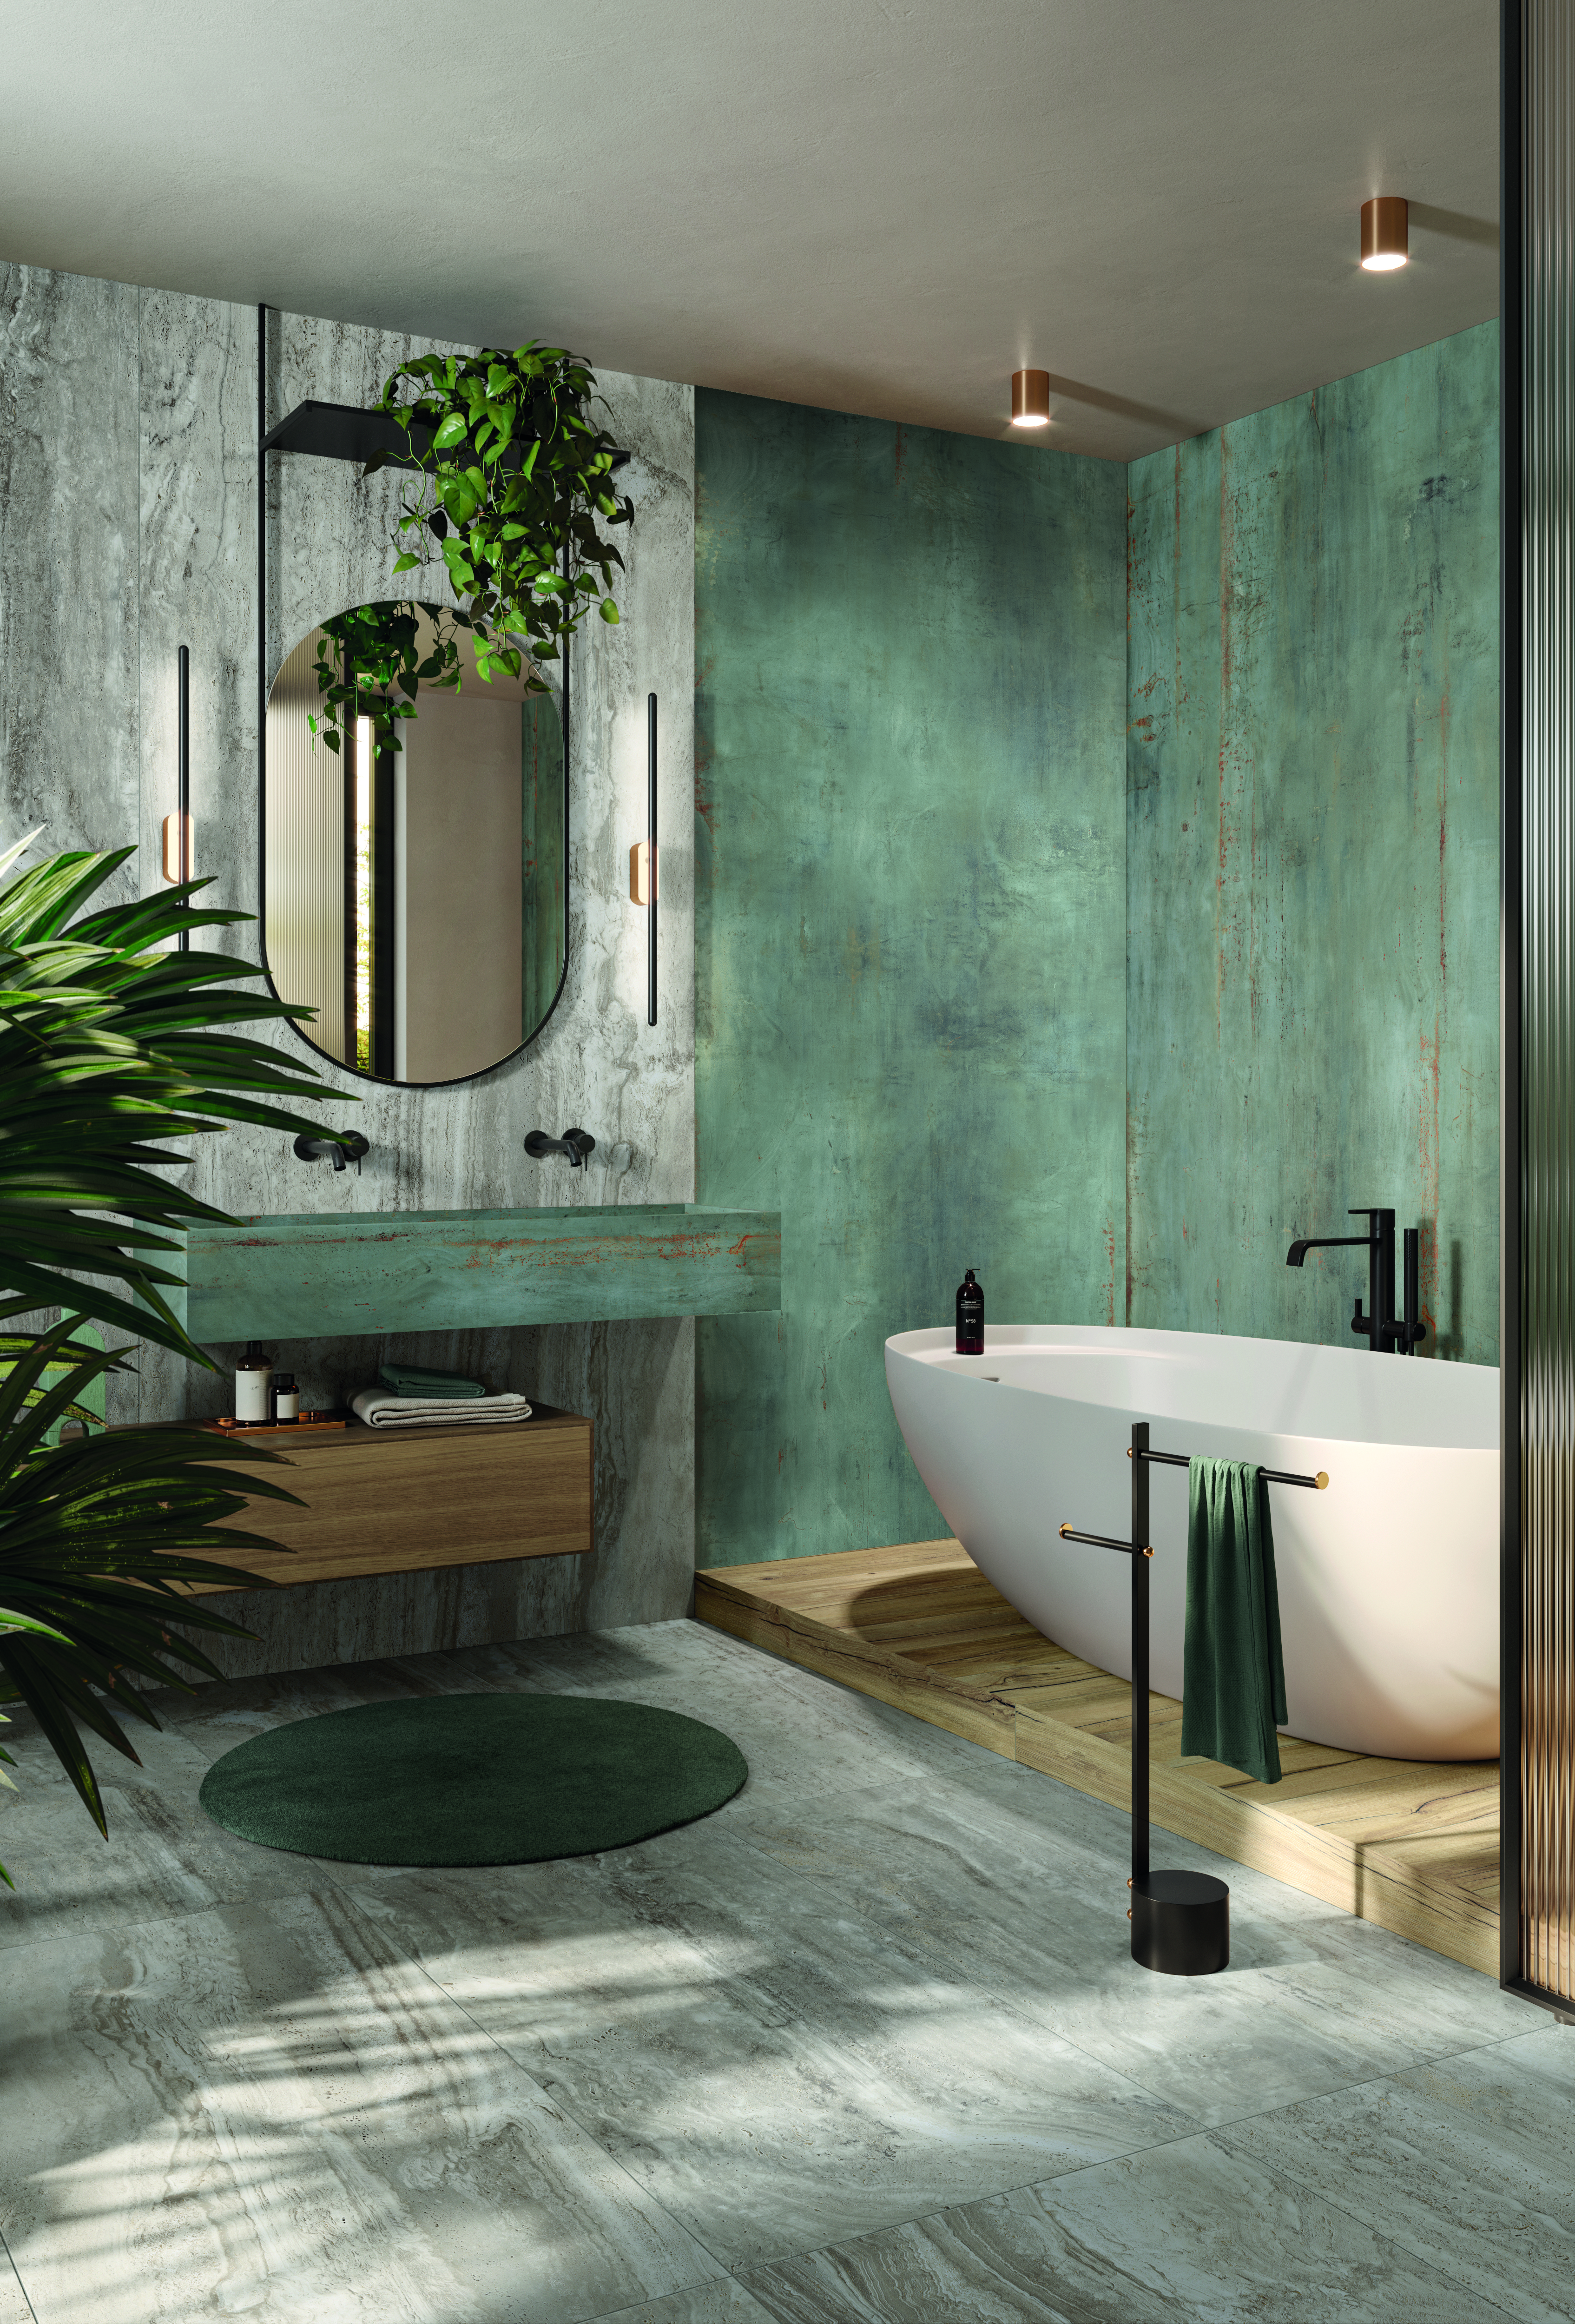 Wood-look tile in a modern bathroom with claw tub, glass backdrop and slate tiled wall